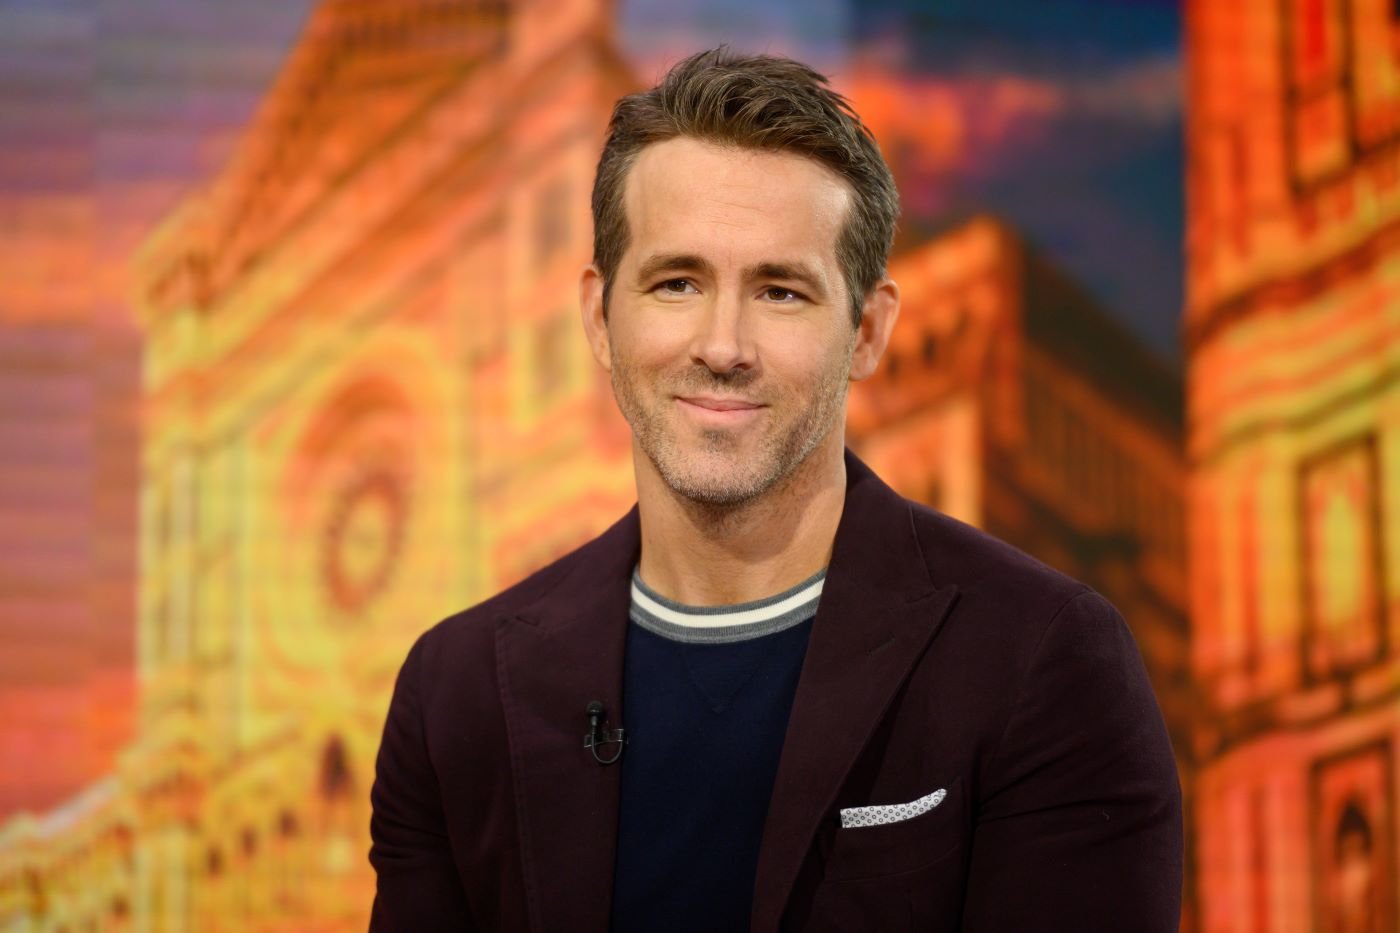 Ryan Reynolds dressed in a maroon suit with a black shirt underneath in front of a background of a digital building with an orange tint.